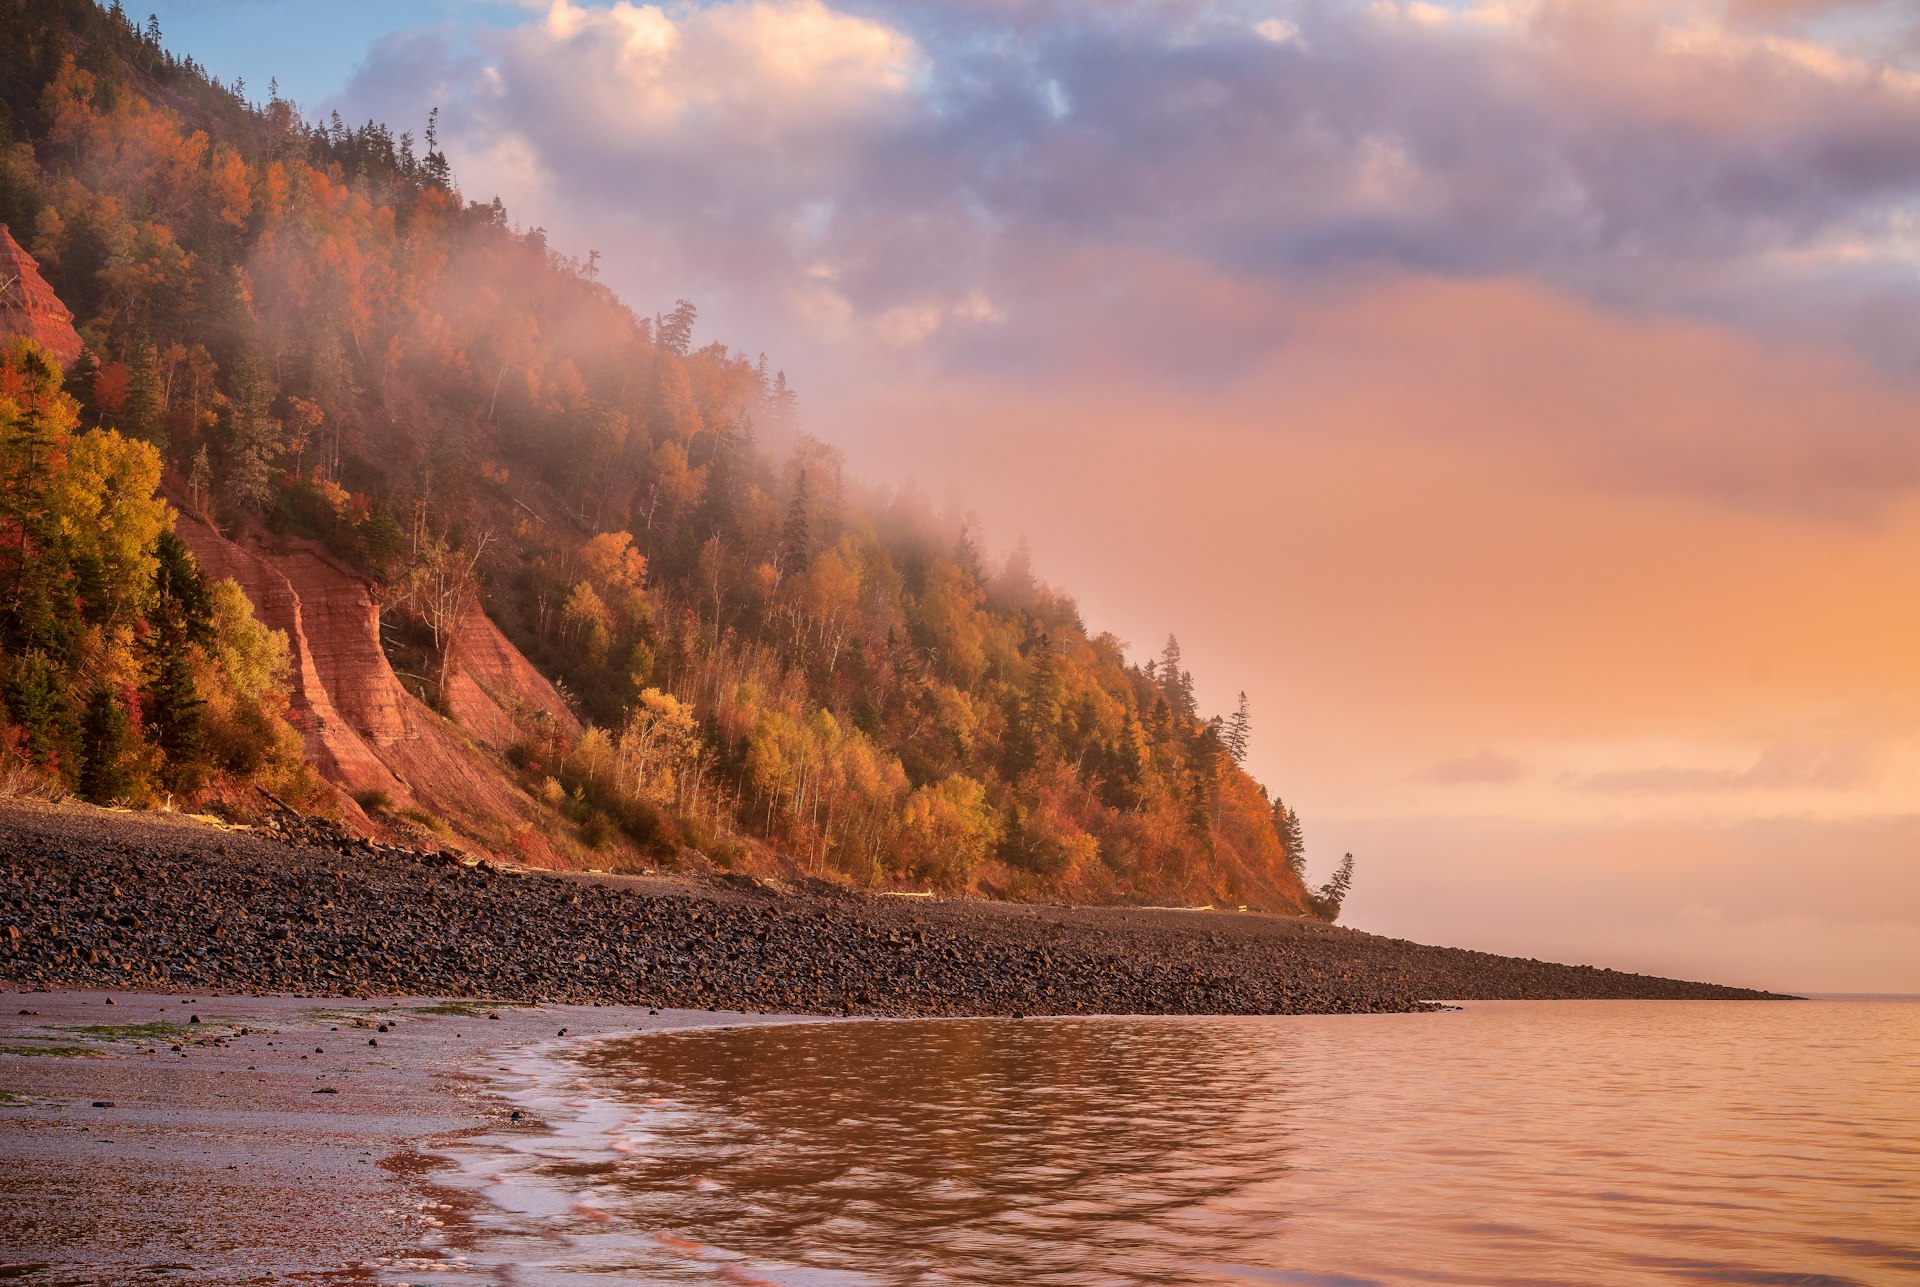 Mist rising off the water with a pink sky, purple clouds, and colorful foliage at Cape Blomidon in the Bay of Fundy's Blomidon Provincial Park